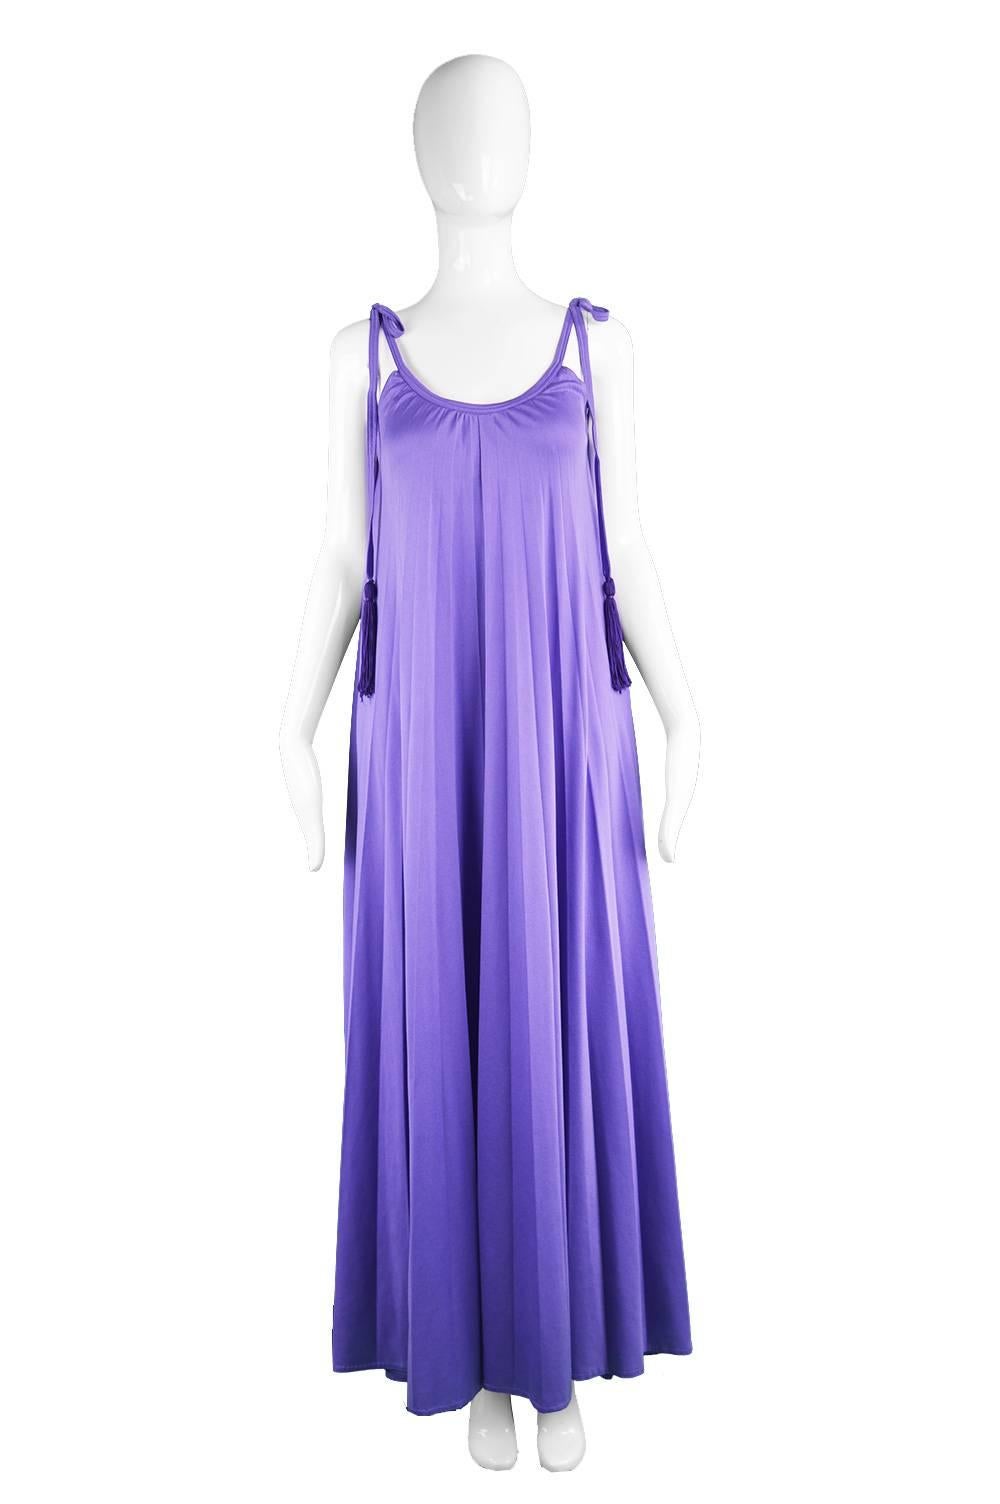 A breathtaking vintage evening gown from the 1970s by iconic British label, Frank Usher,. In yards of the incredibly flattering, fluid, synthetic jersey that Frank Usher is renowned for using in the 70s because it drapes so perfectly. A vibrant